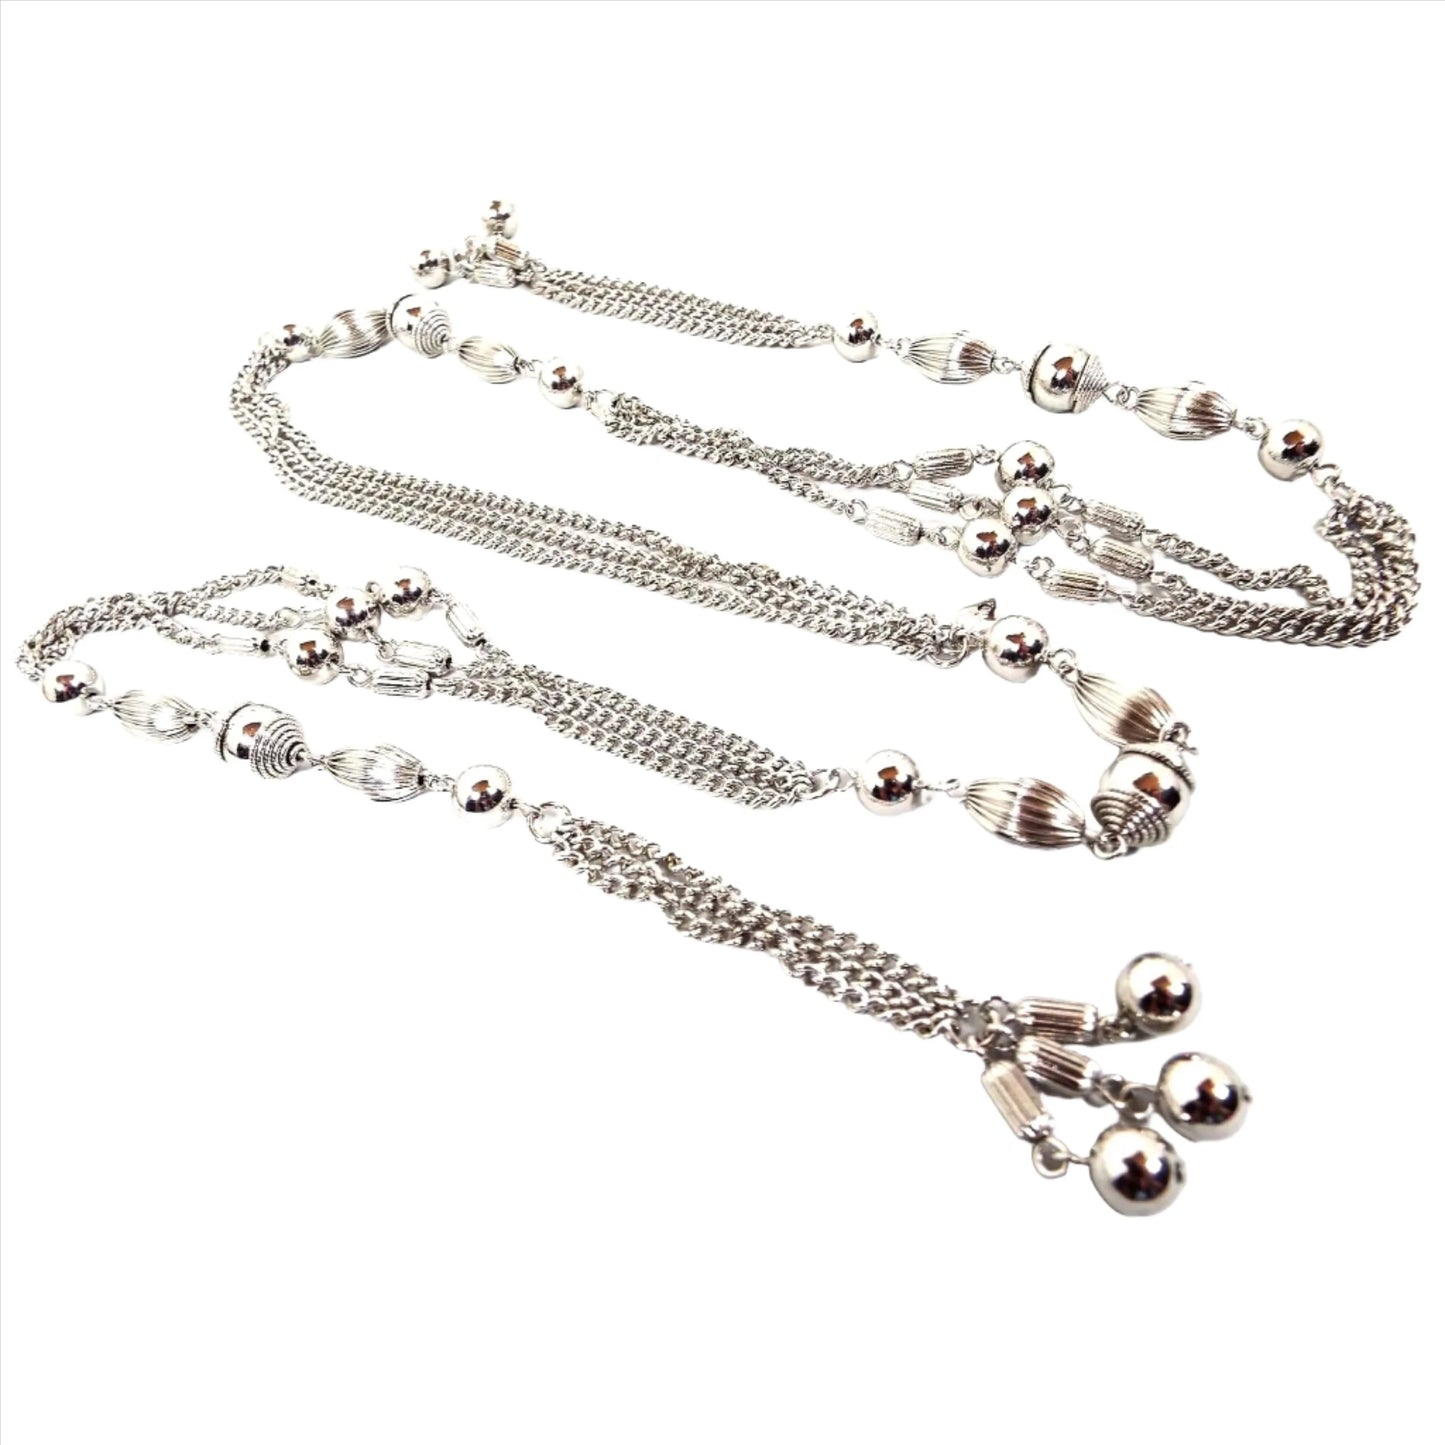 Top view of the Mid Century vintage Sarah Coventry tassel lariat necklace. It is silver tone in color with strands of curb chain in between round and corrugated metal beads. The ends have corrugated barrel beads with round smooth metal beads at the ends of the tassel areas. The necklace is open and wraps around lariat style rather than having a clasp.